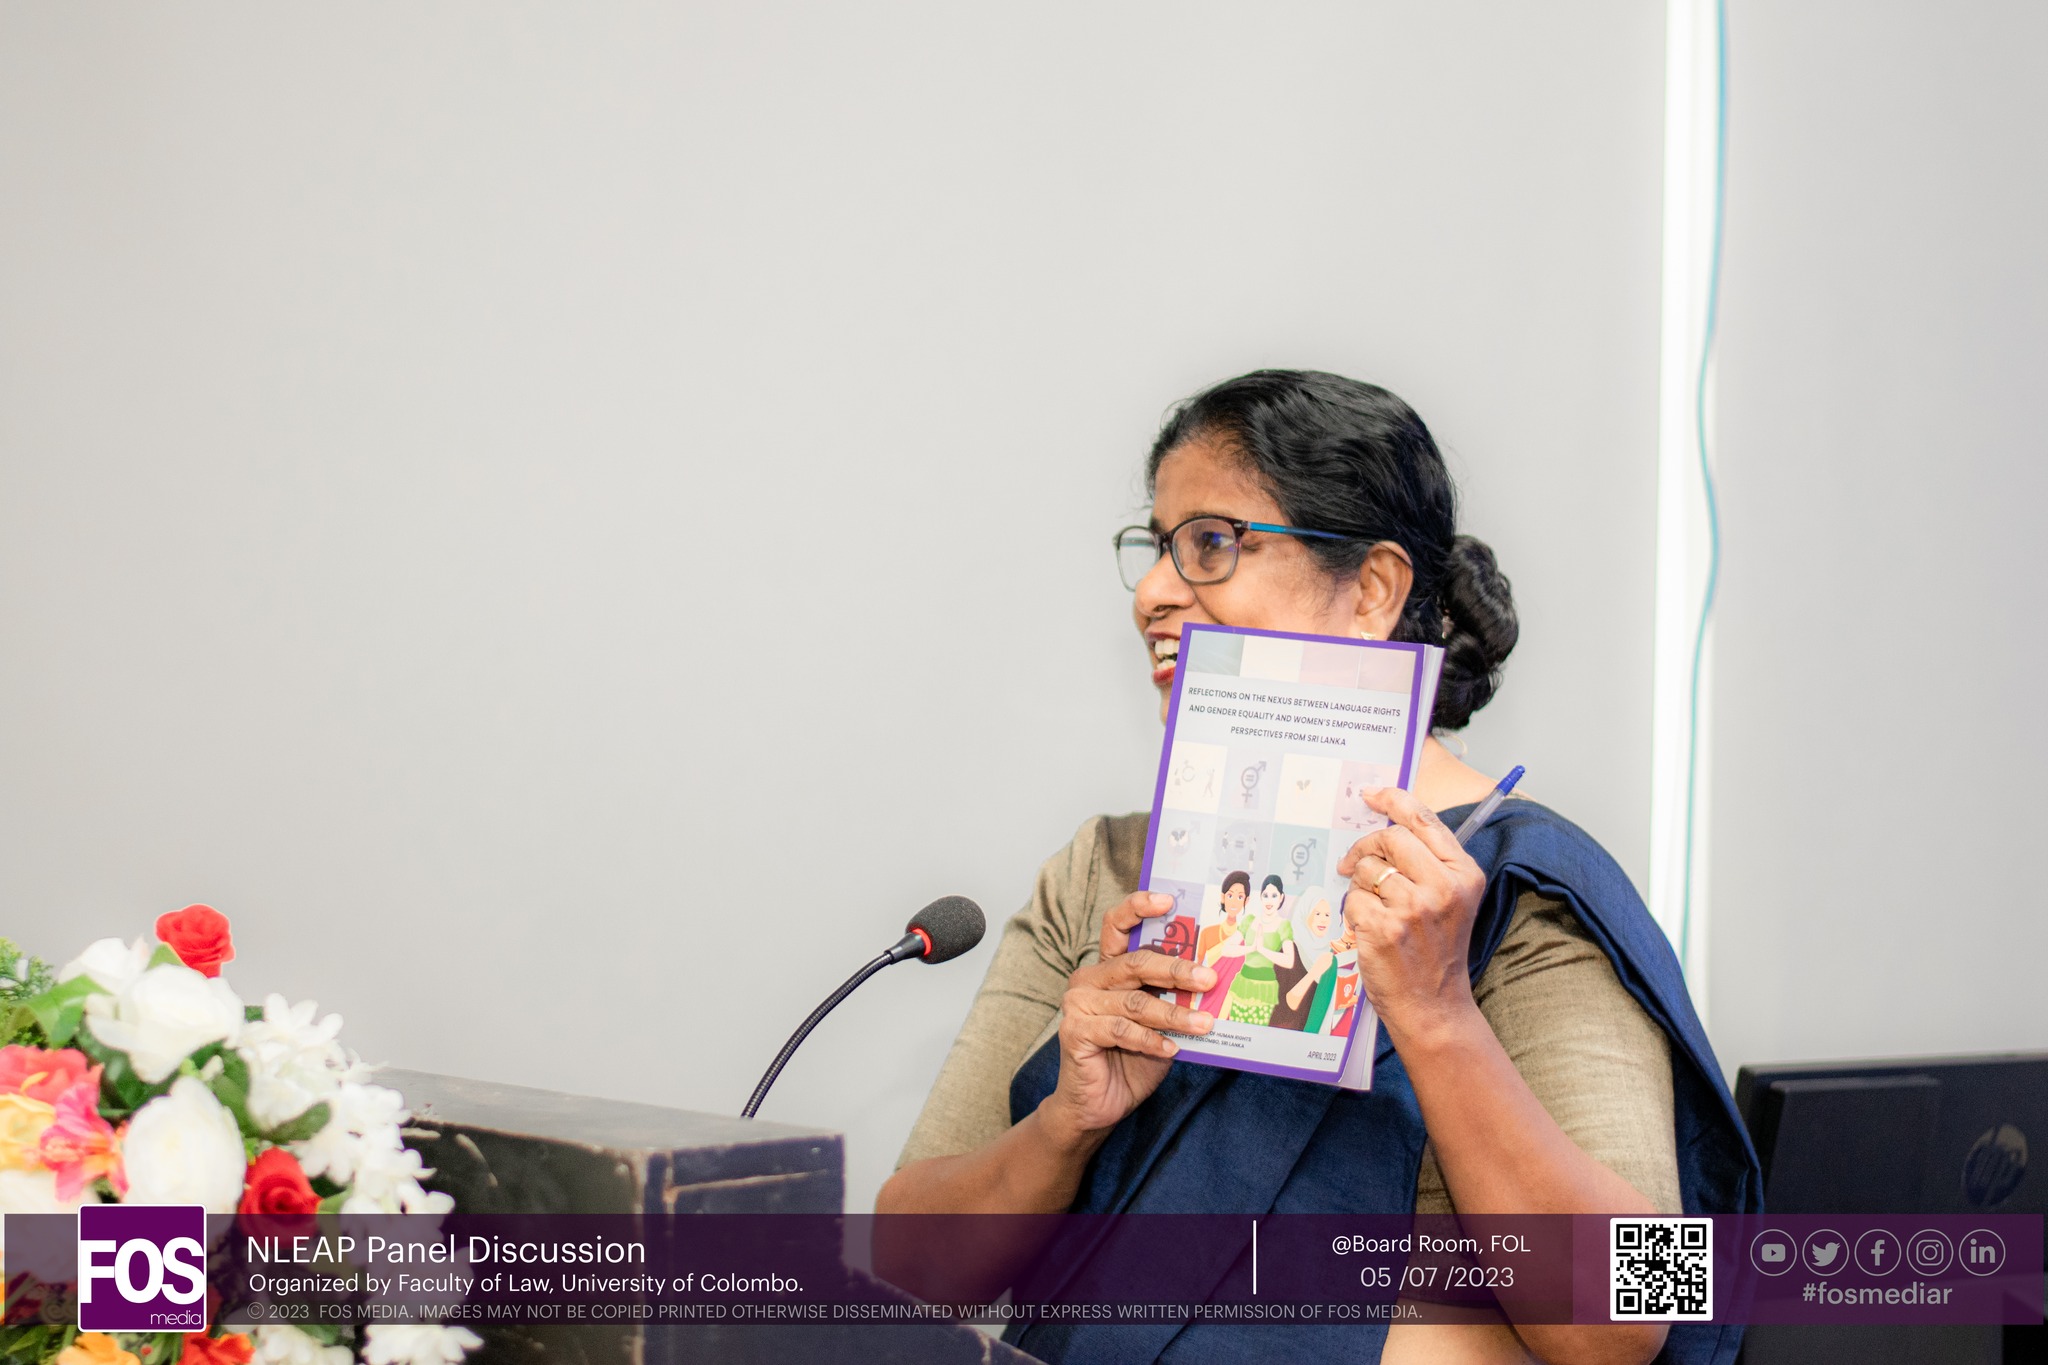 Panel Discussion on “REFLECTIONS ON THE NEXUS BETWEEN LANGUAGE RIGHTS AND GENDER EQUALITY AND WOMEN’S EMPOWERMENT: PERSPECTIVES FROM SRI LANKA”